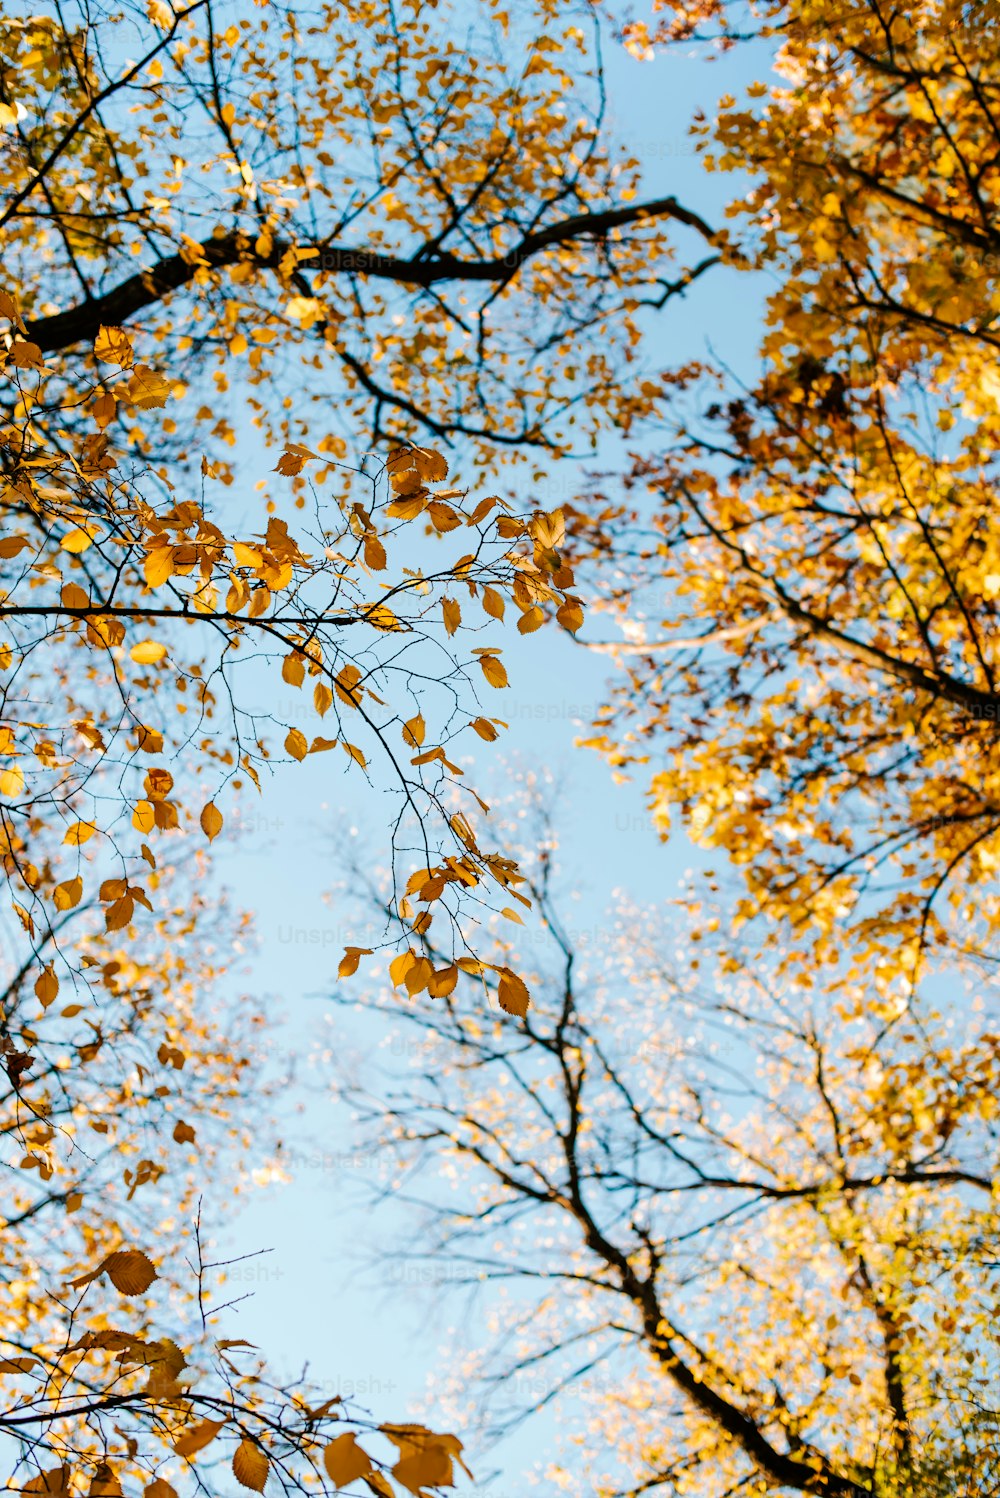 looking up at the branches of a tree with yellow leaves